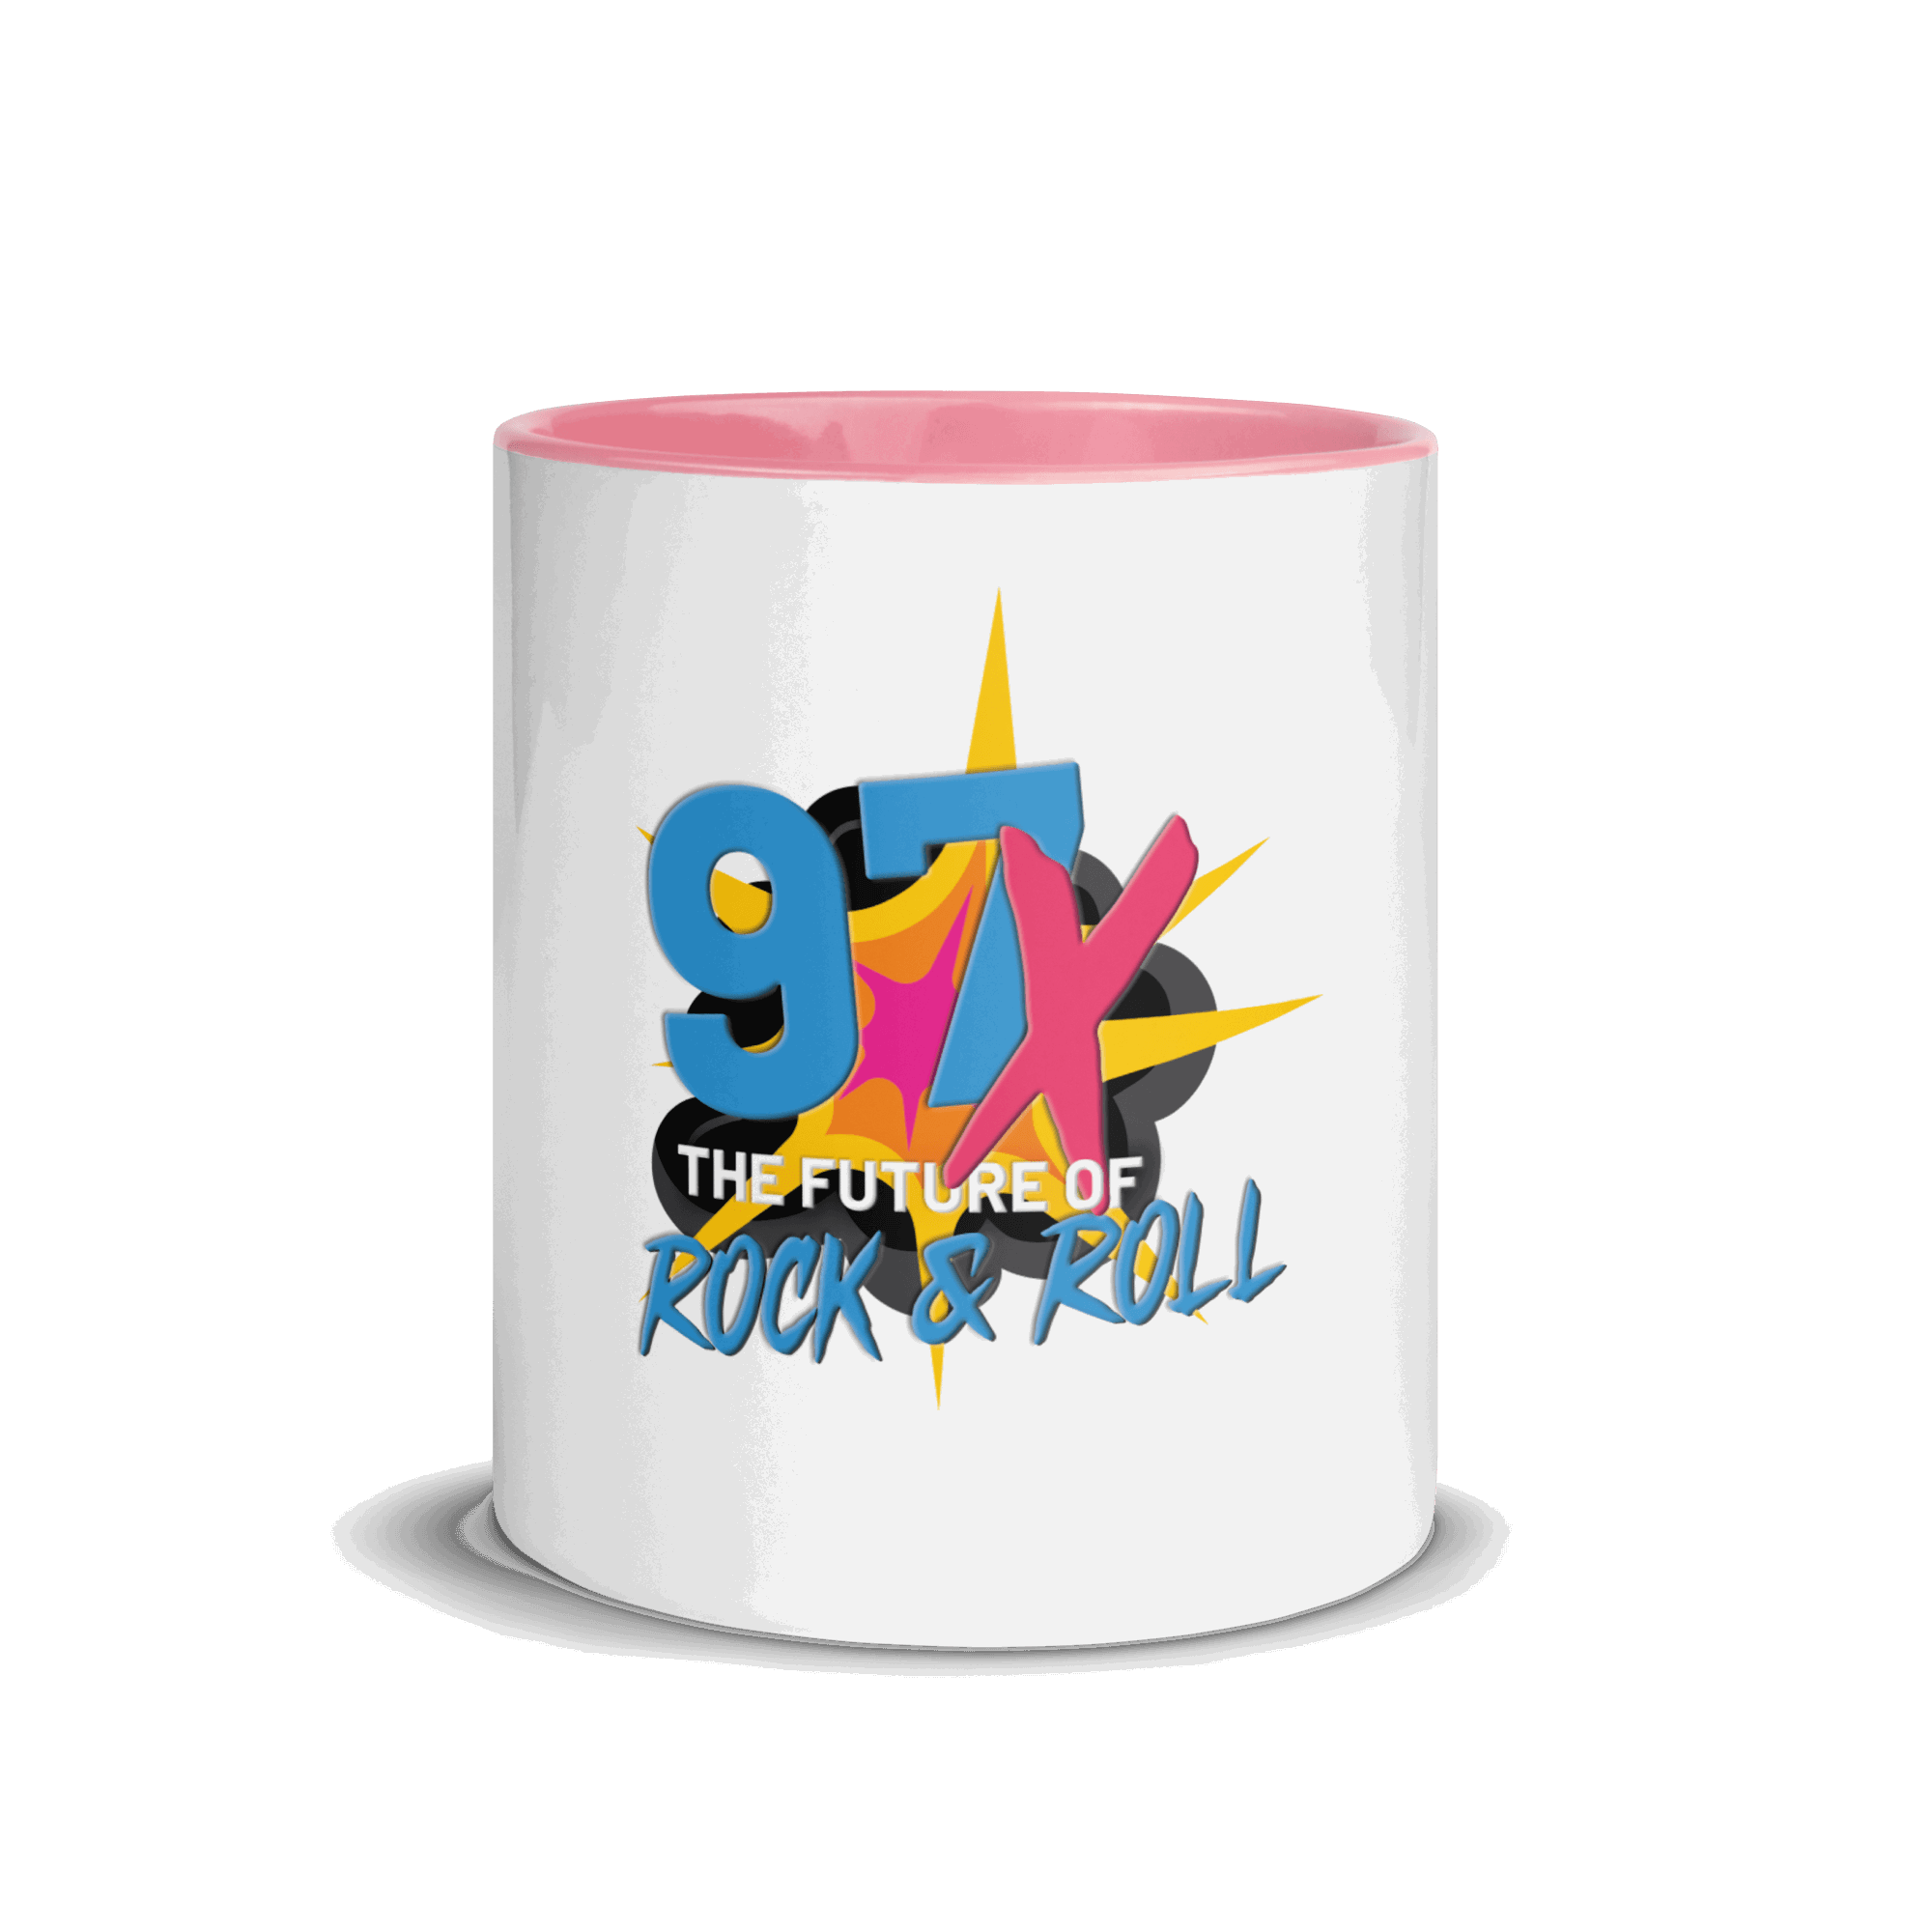 97x The Future Of Rock n Roll Mug with Color Inside